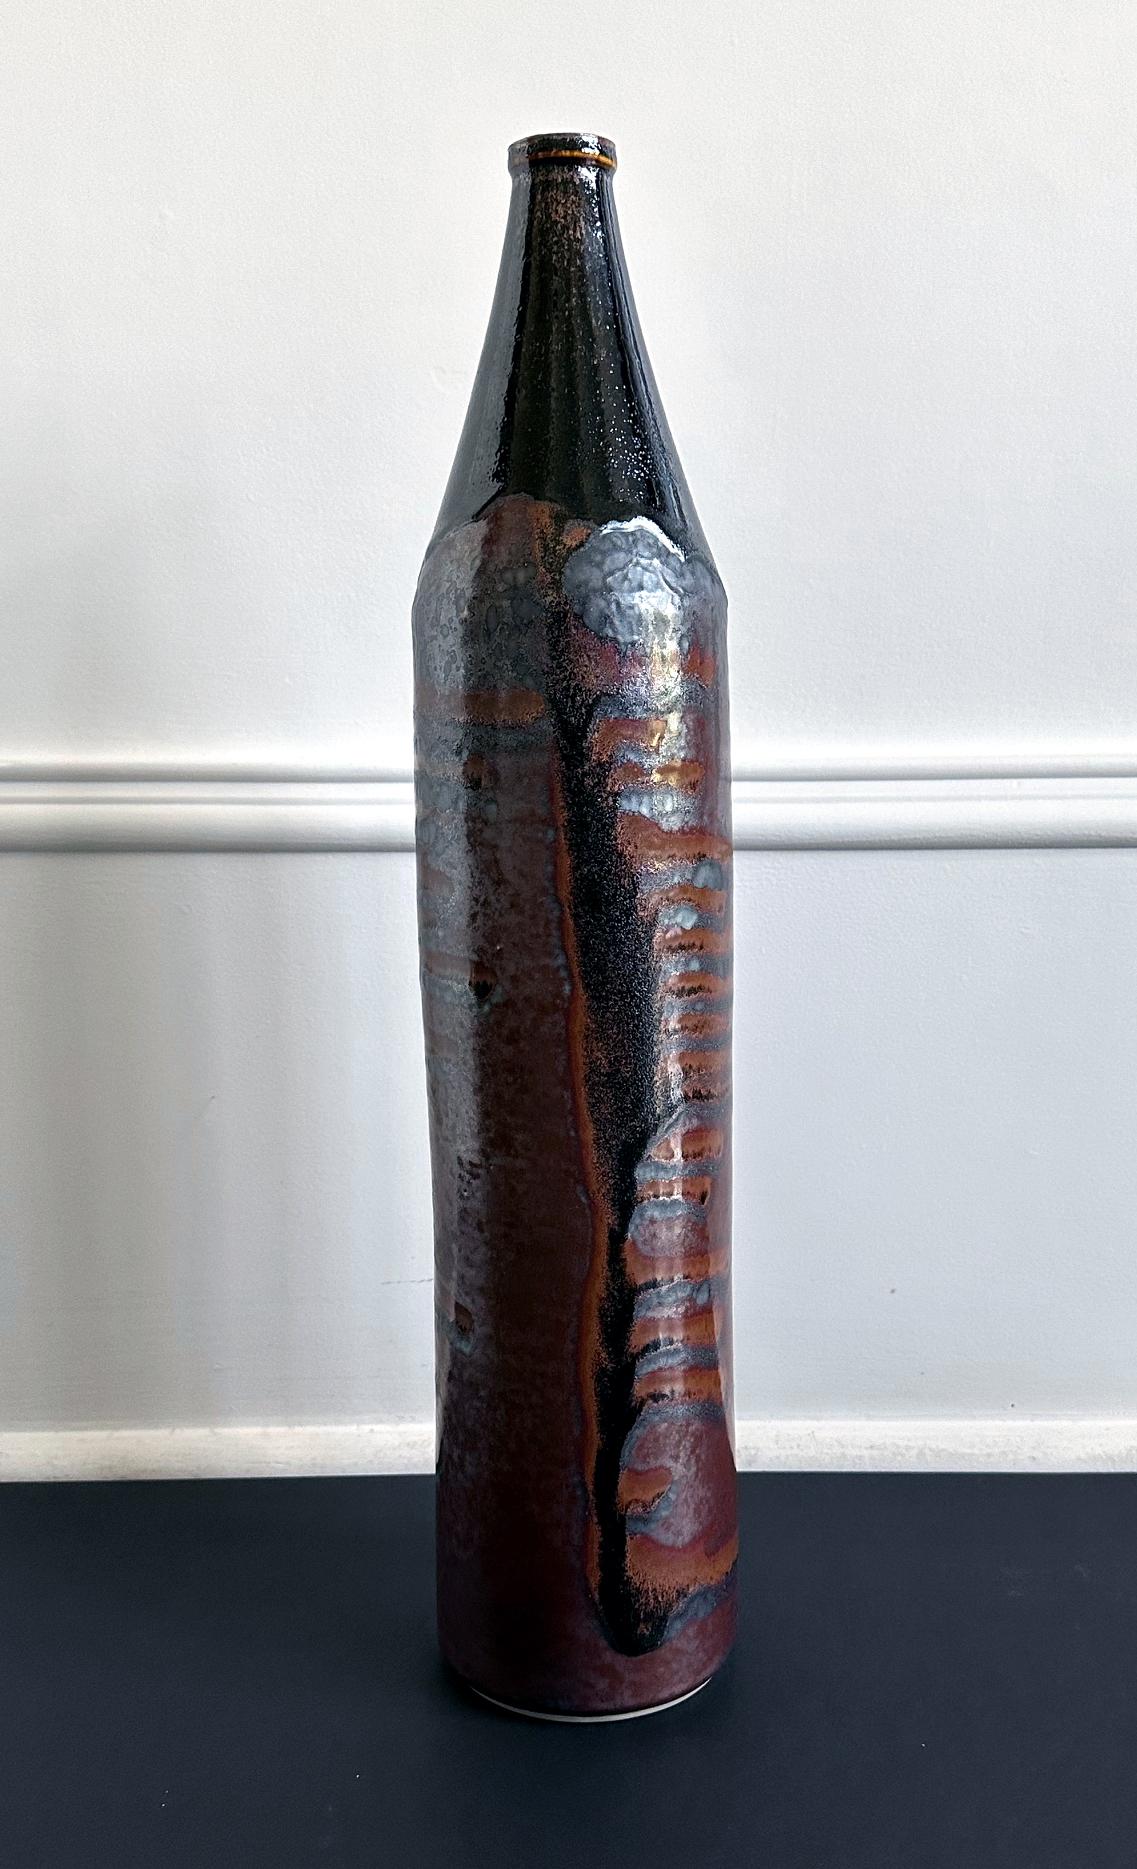 An early ceramic vase in a cylinder form by potter Brother Thomas Bezanson (1929-2007). Unusually tall at 21.75 inches, the vase strikes the viewer with its slender silouette with a tapering neck and mouth opening. What is extraordinary about this